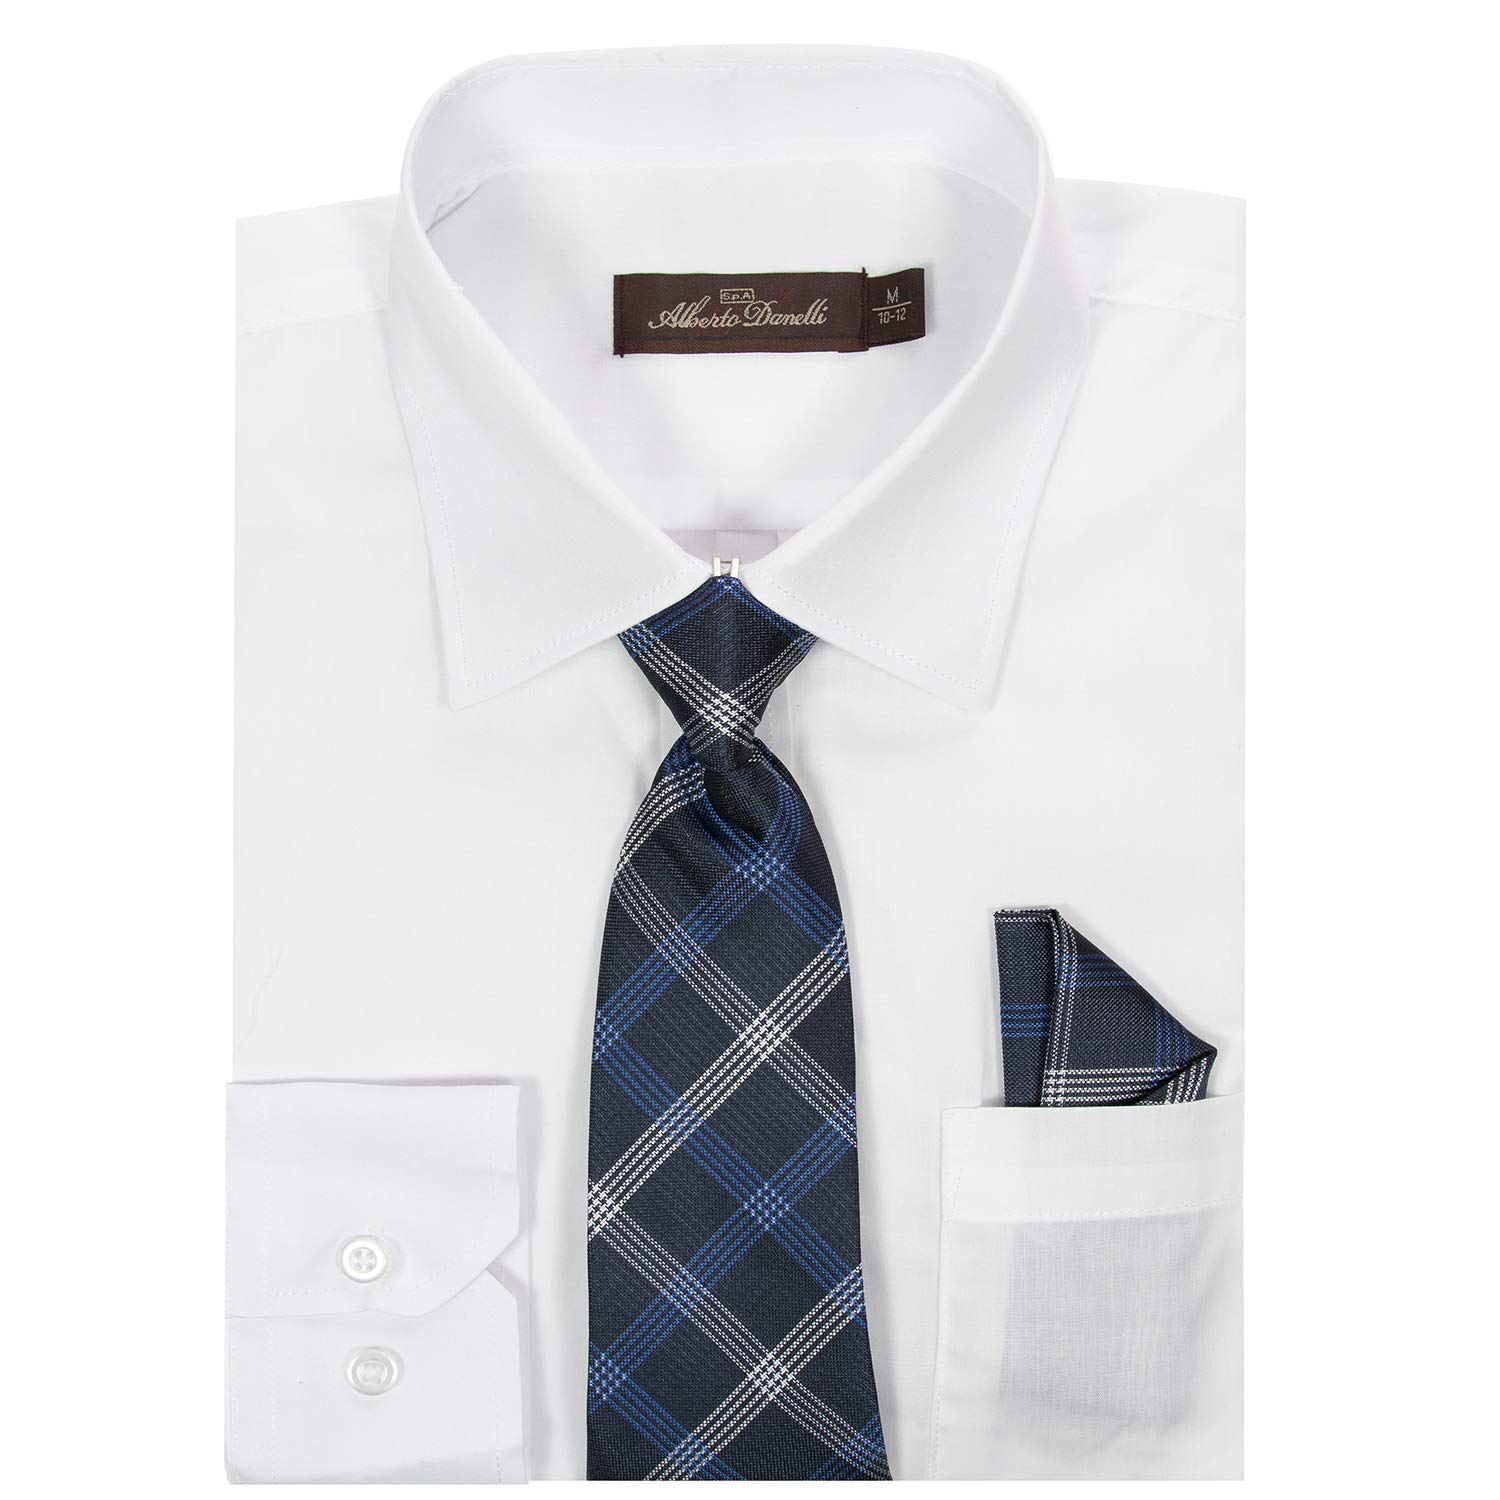 Alberto Danelli Boys Dress Shirt With Matching Tie And Handkerchief, Long Sleeve Button Down, Pocket, White D, 8